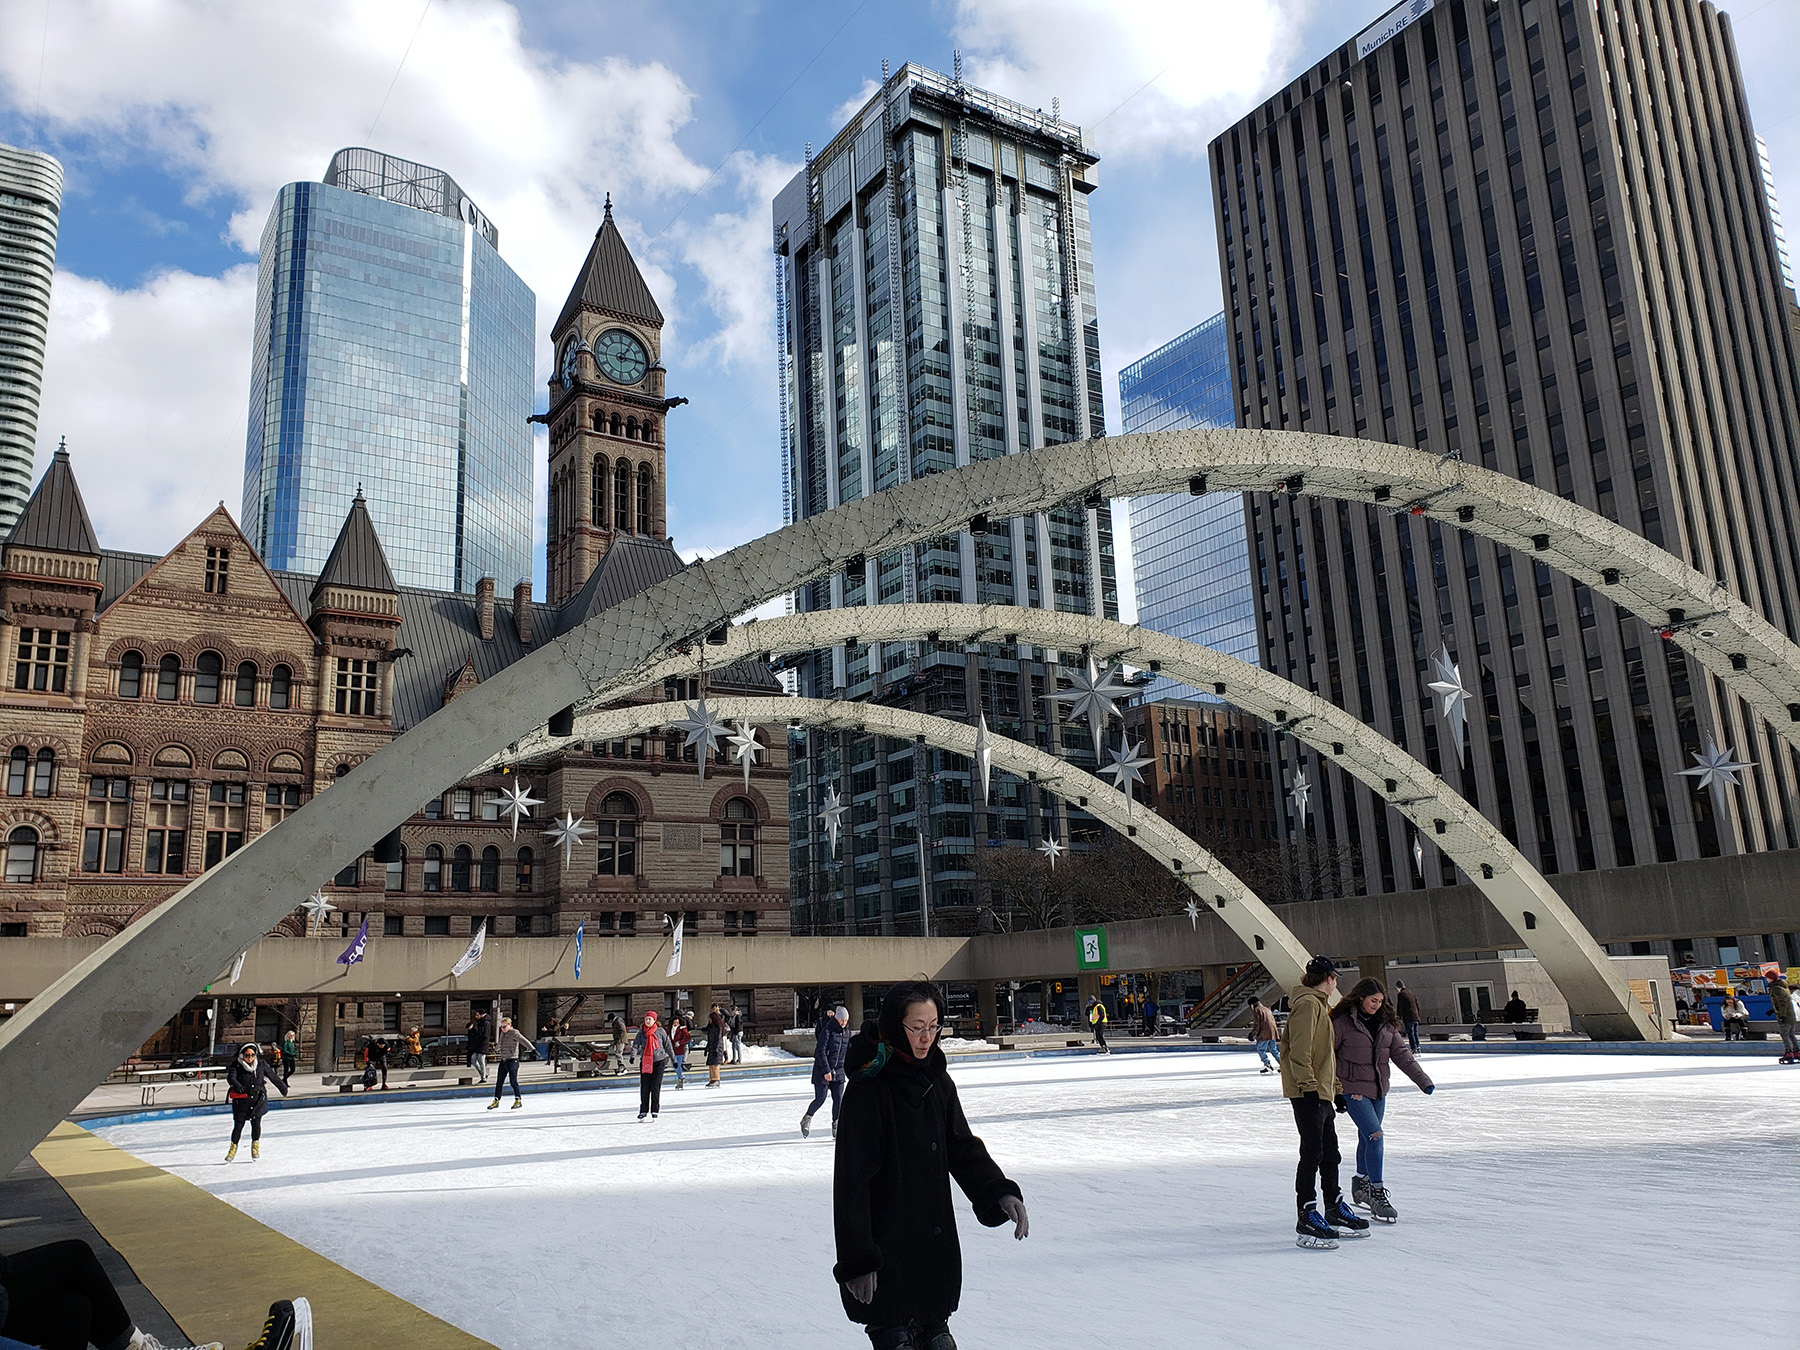 The ice rink at Nathan Phillips Square.